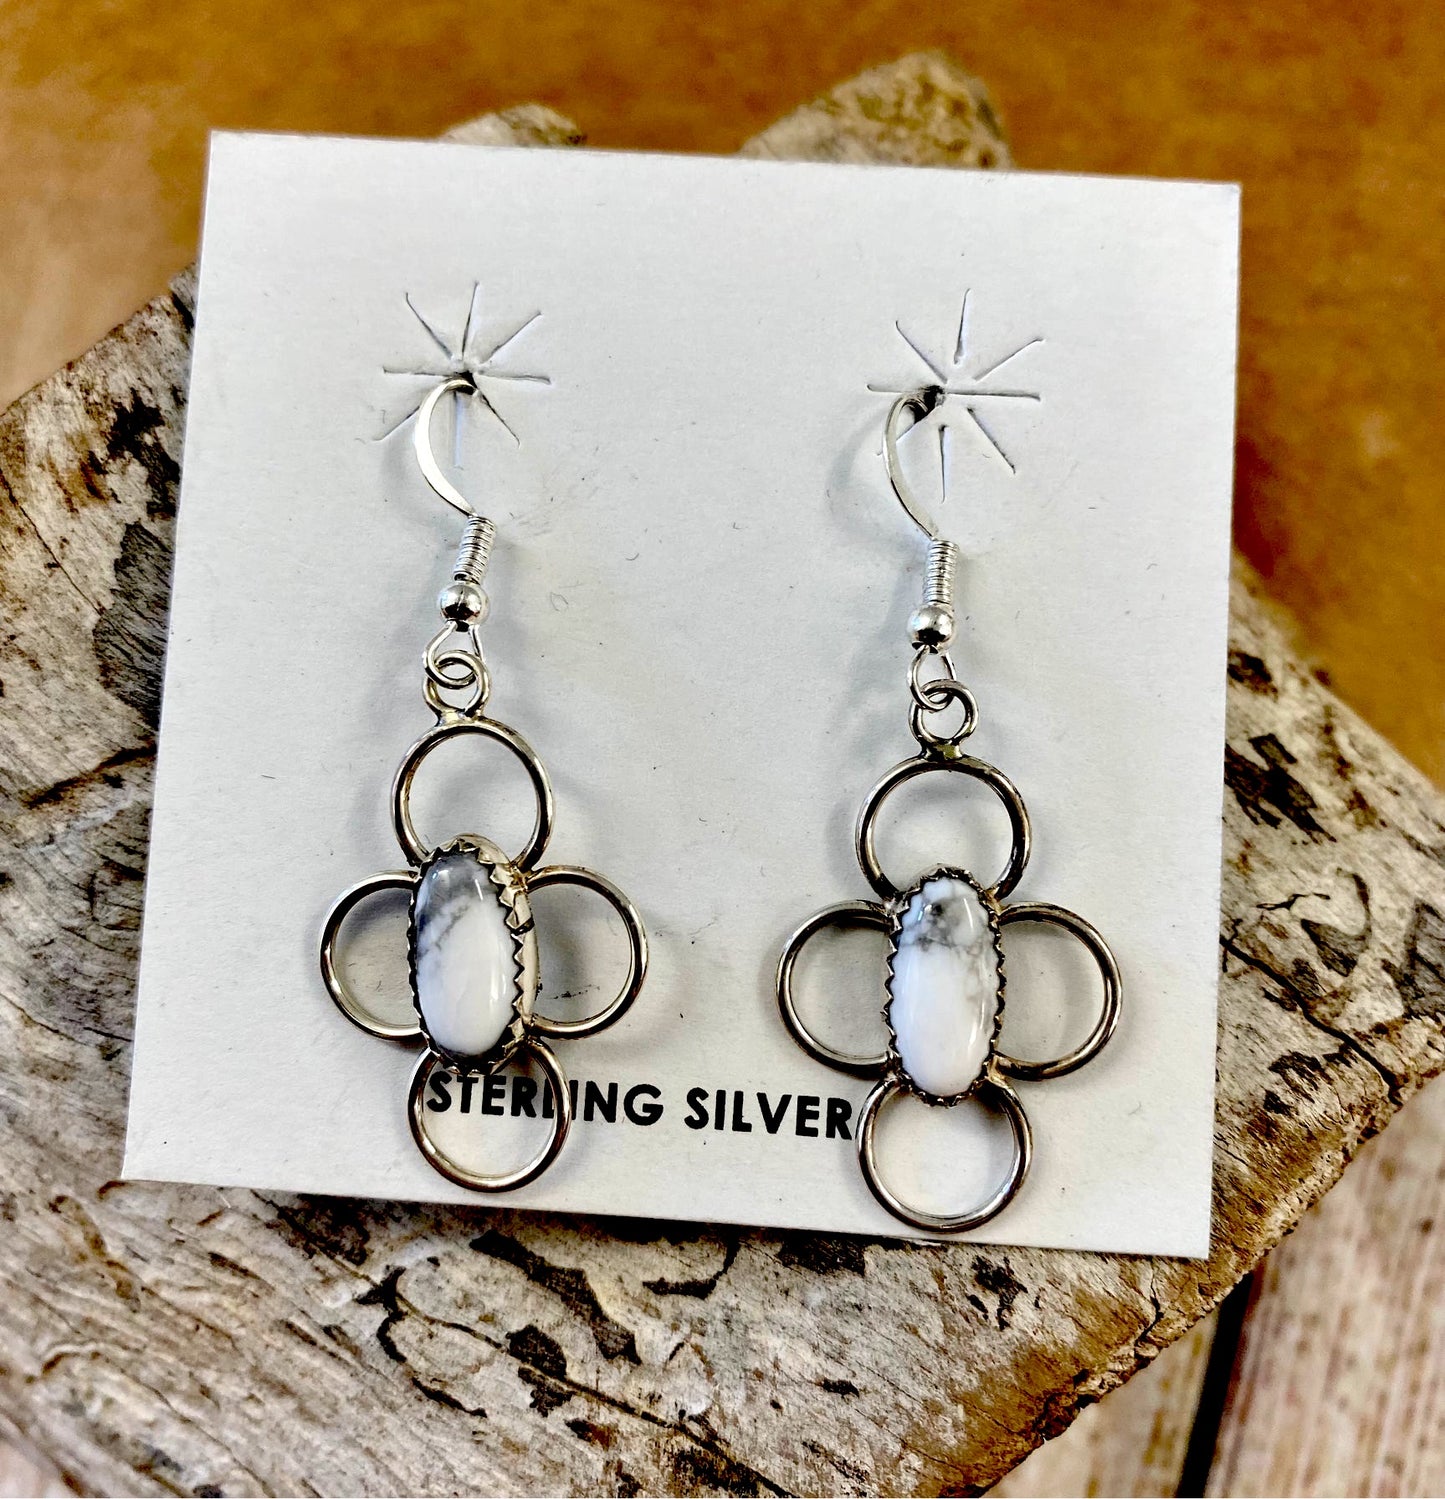 The Barb White Silver Earrings